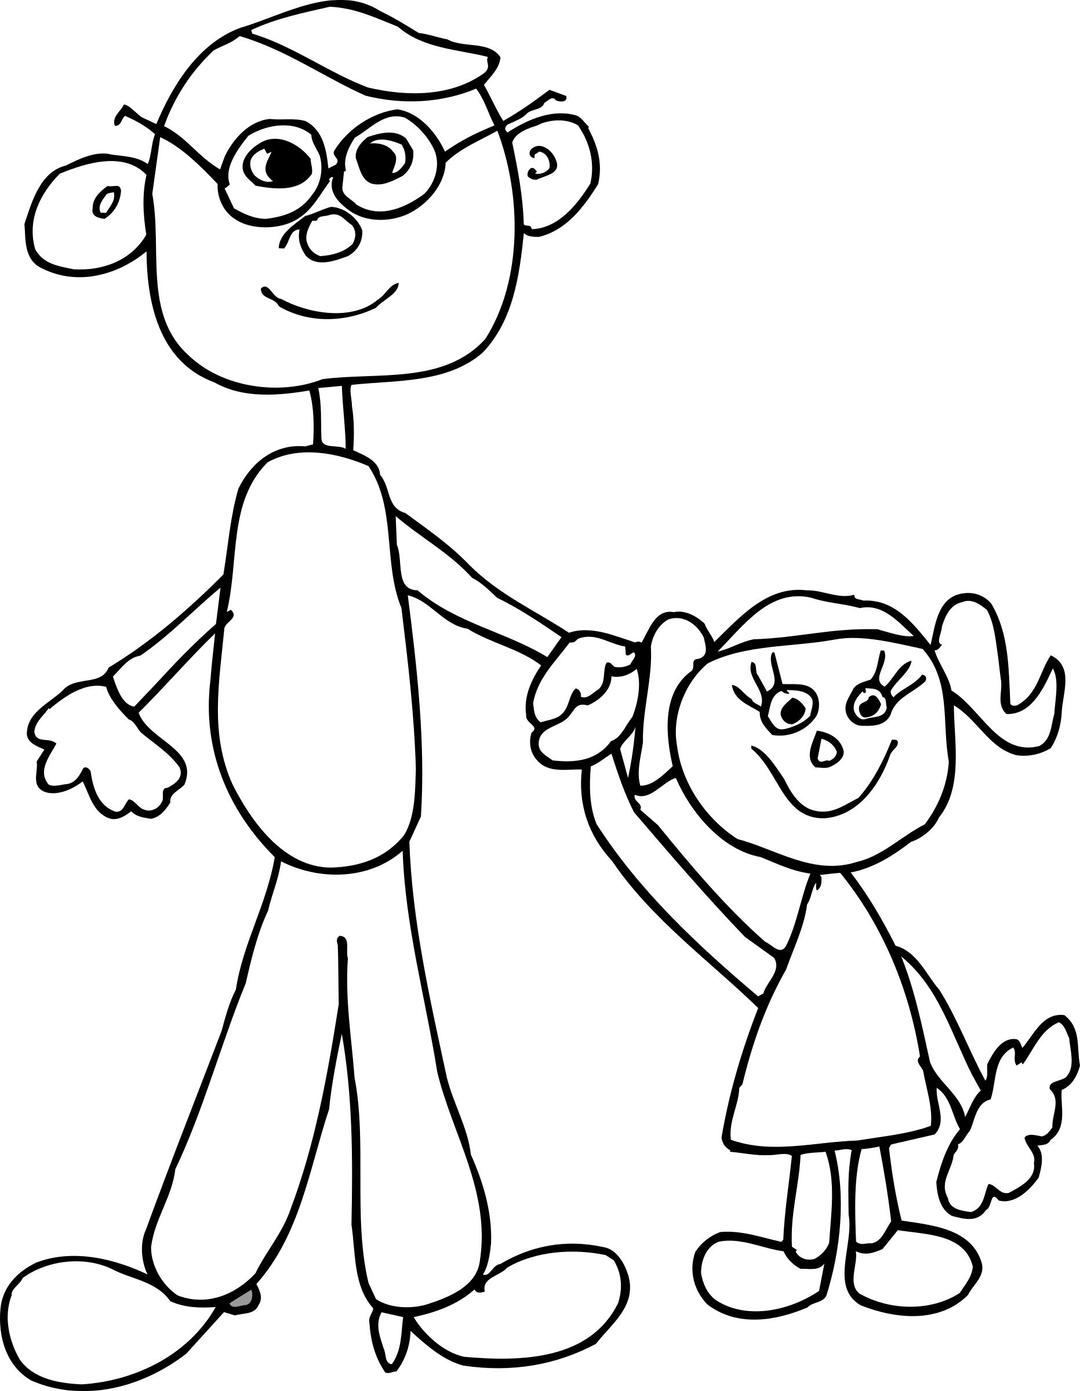 Dad holding daughters hand png transparent